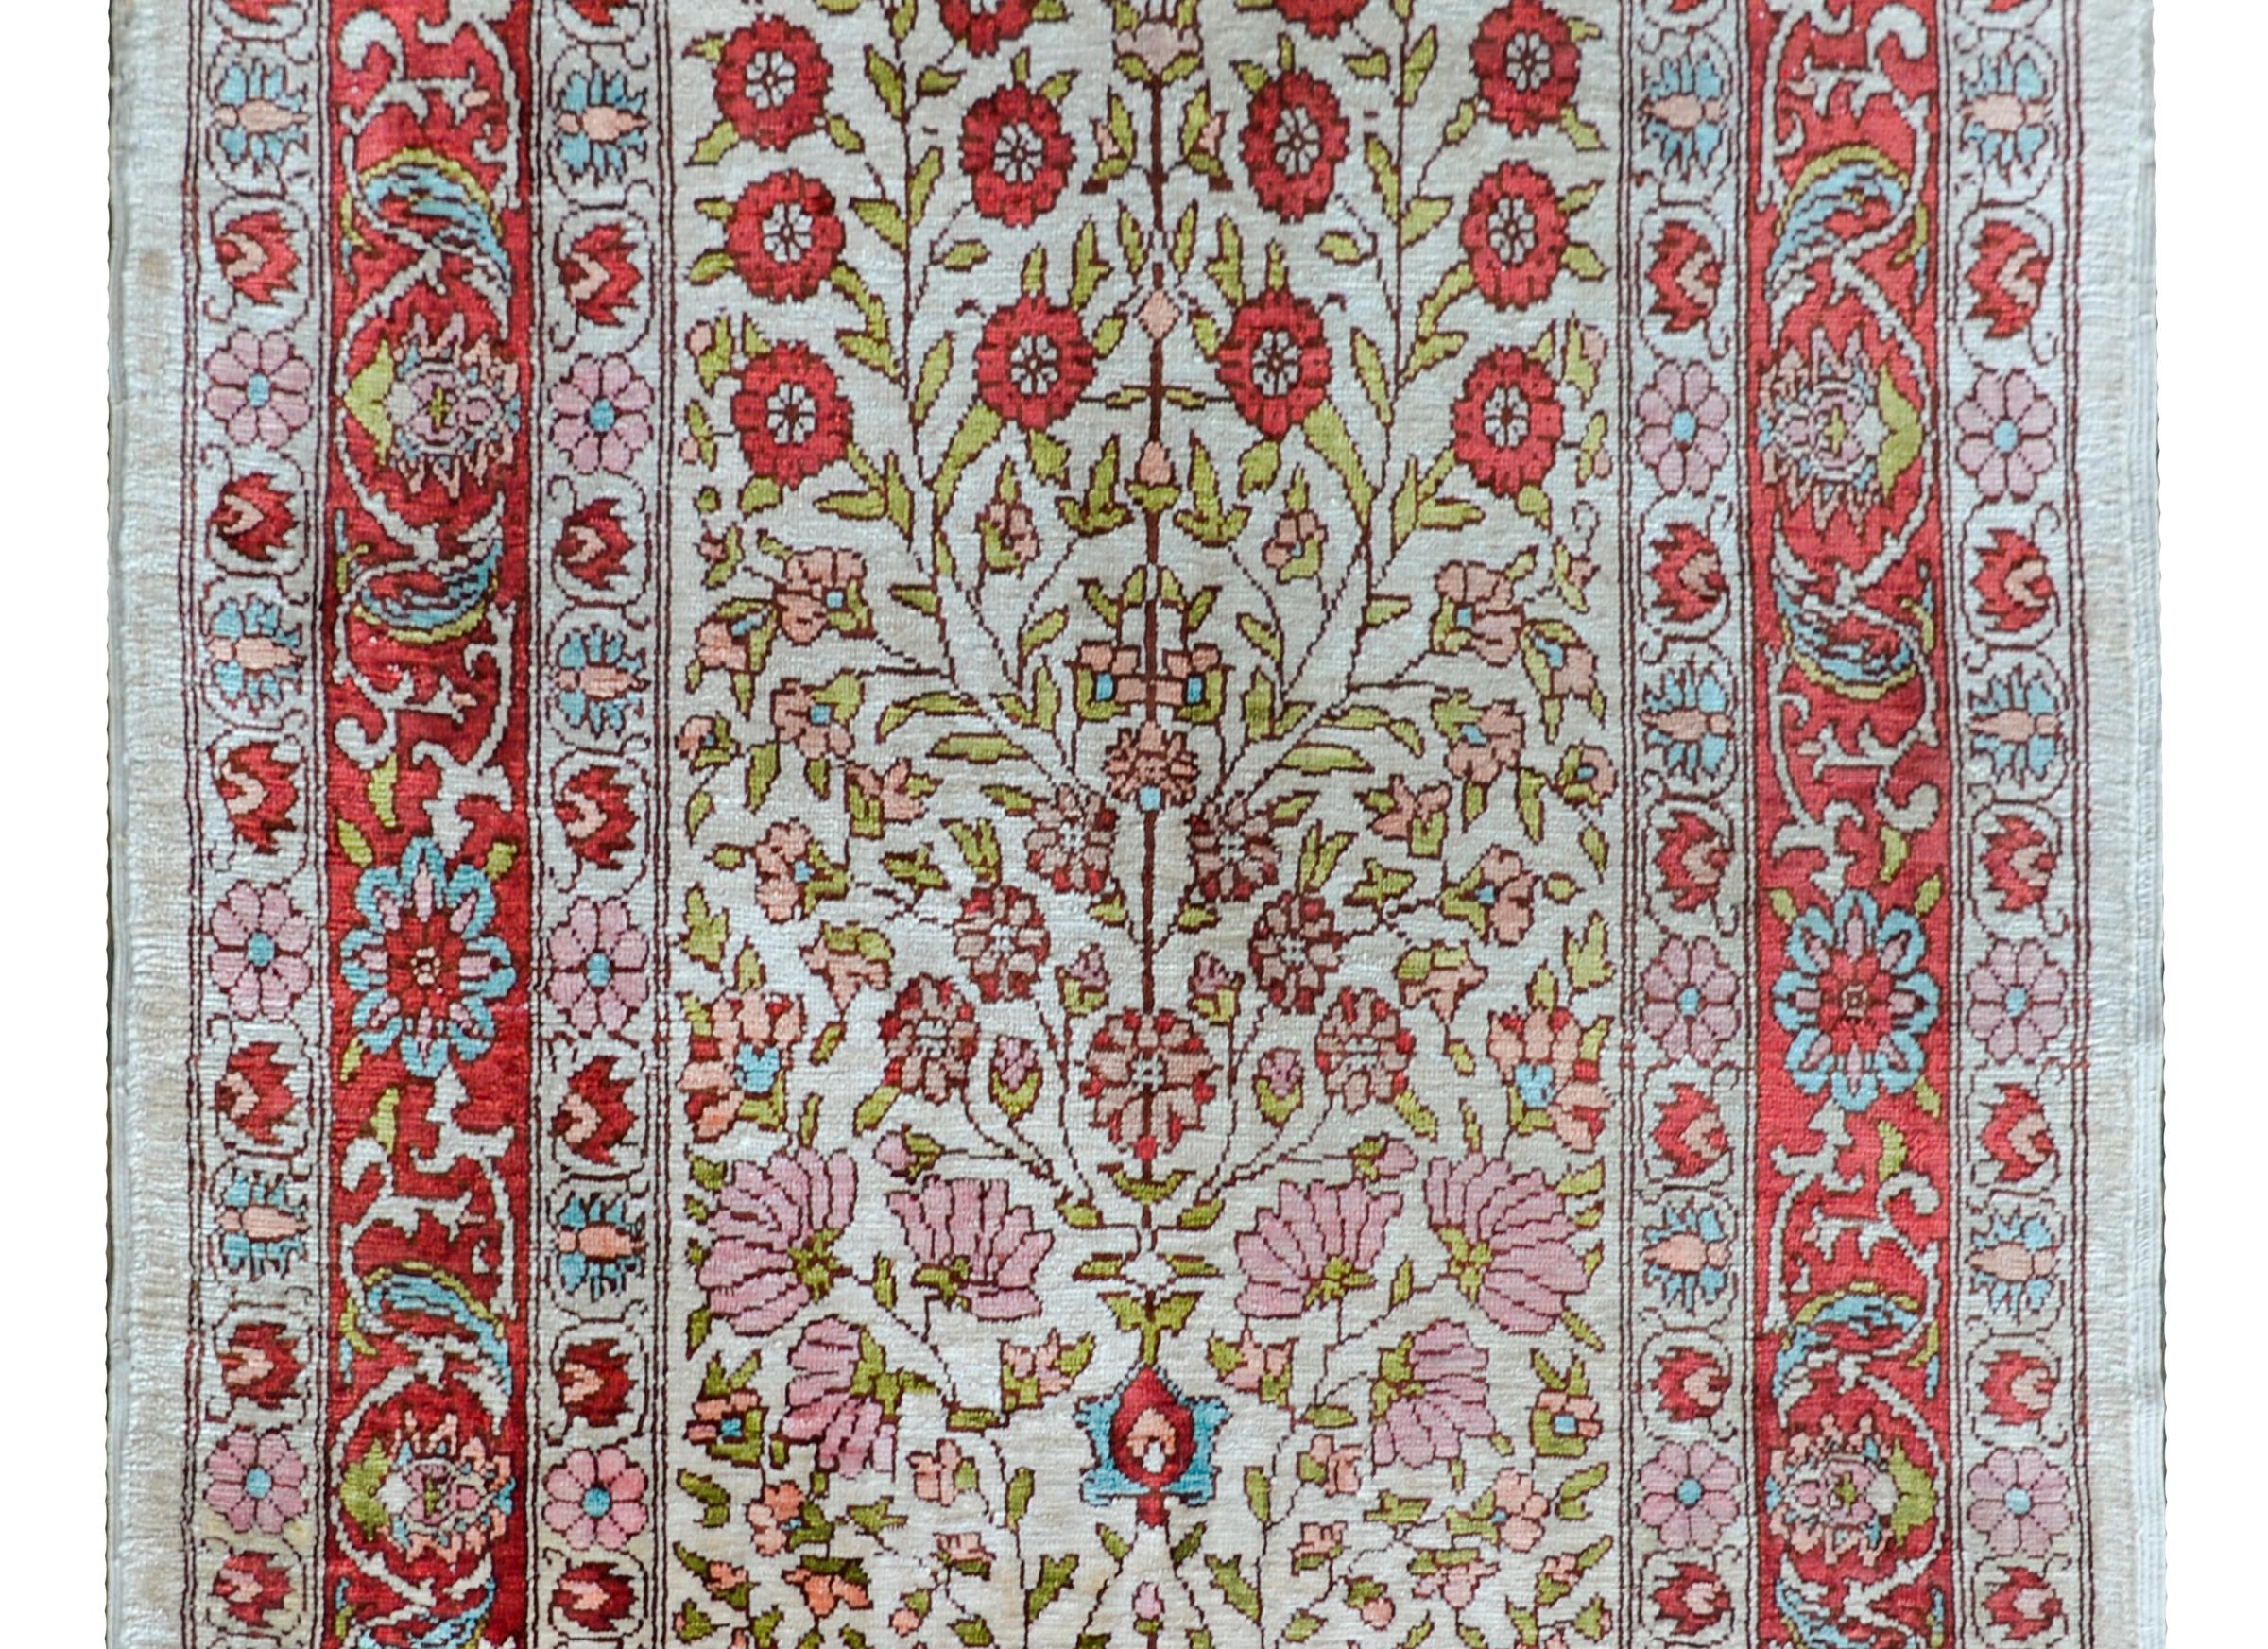 A wonderful vintage Turkish Hereke rug made from 100% silk, and woven with a beautiful multi-colored tree-of-life pattern in the center surrounded by a wide borer containing multiple petite floral colored stripes.